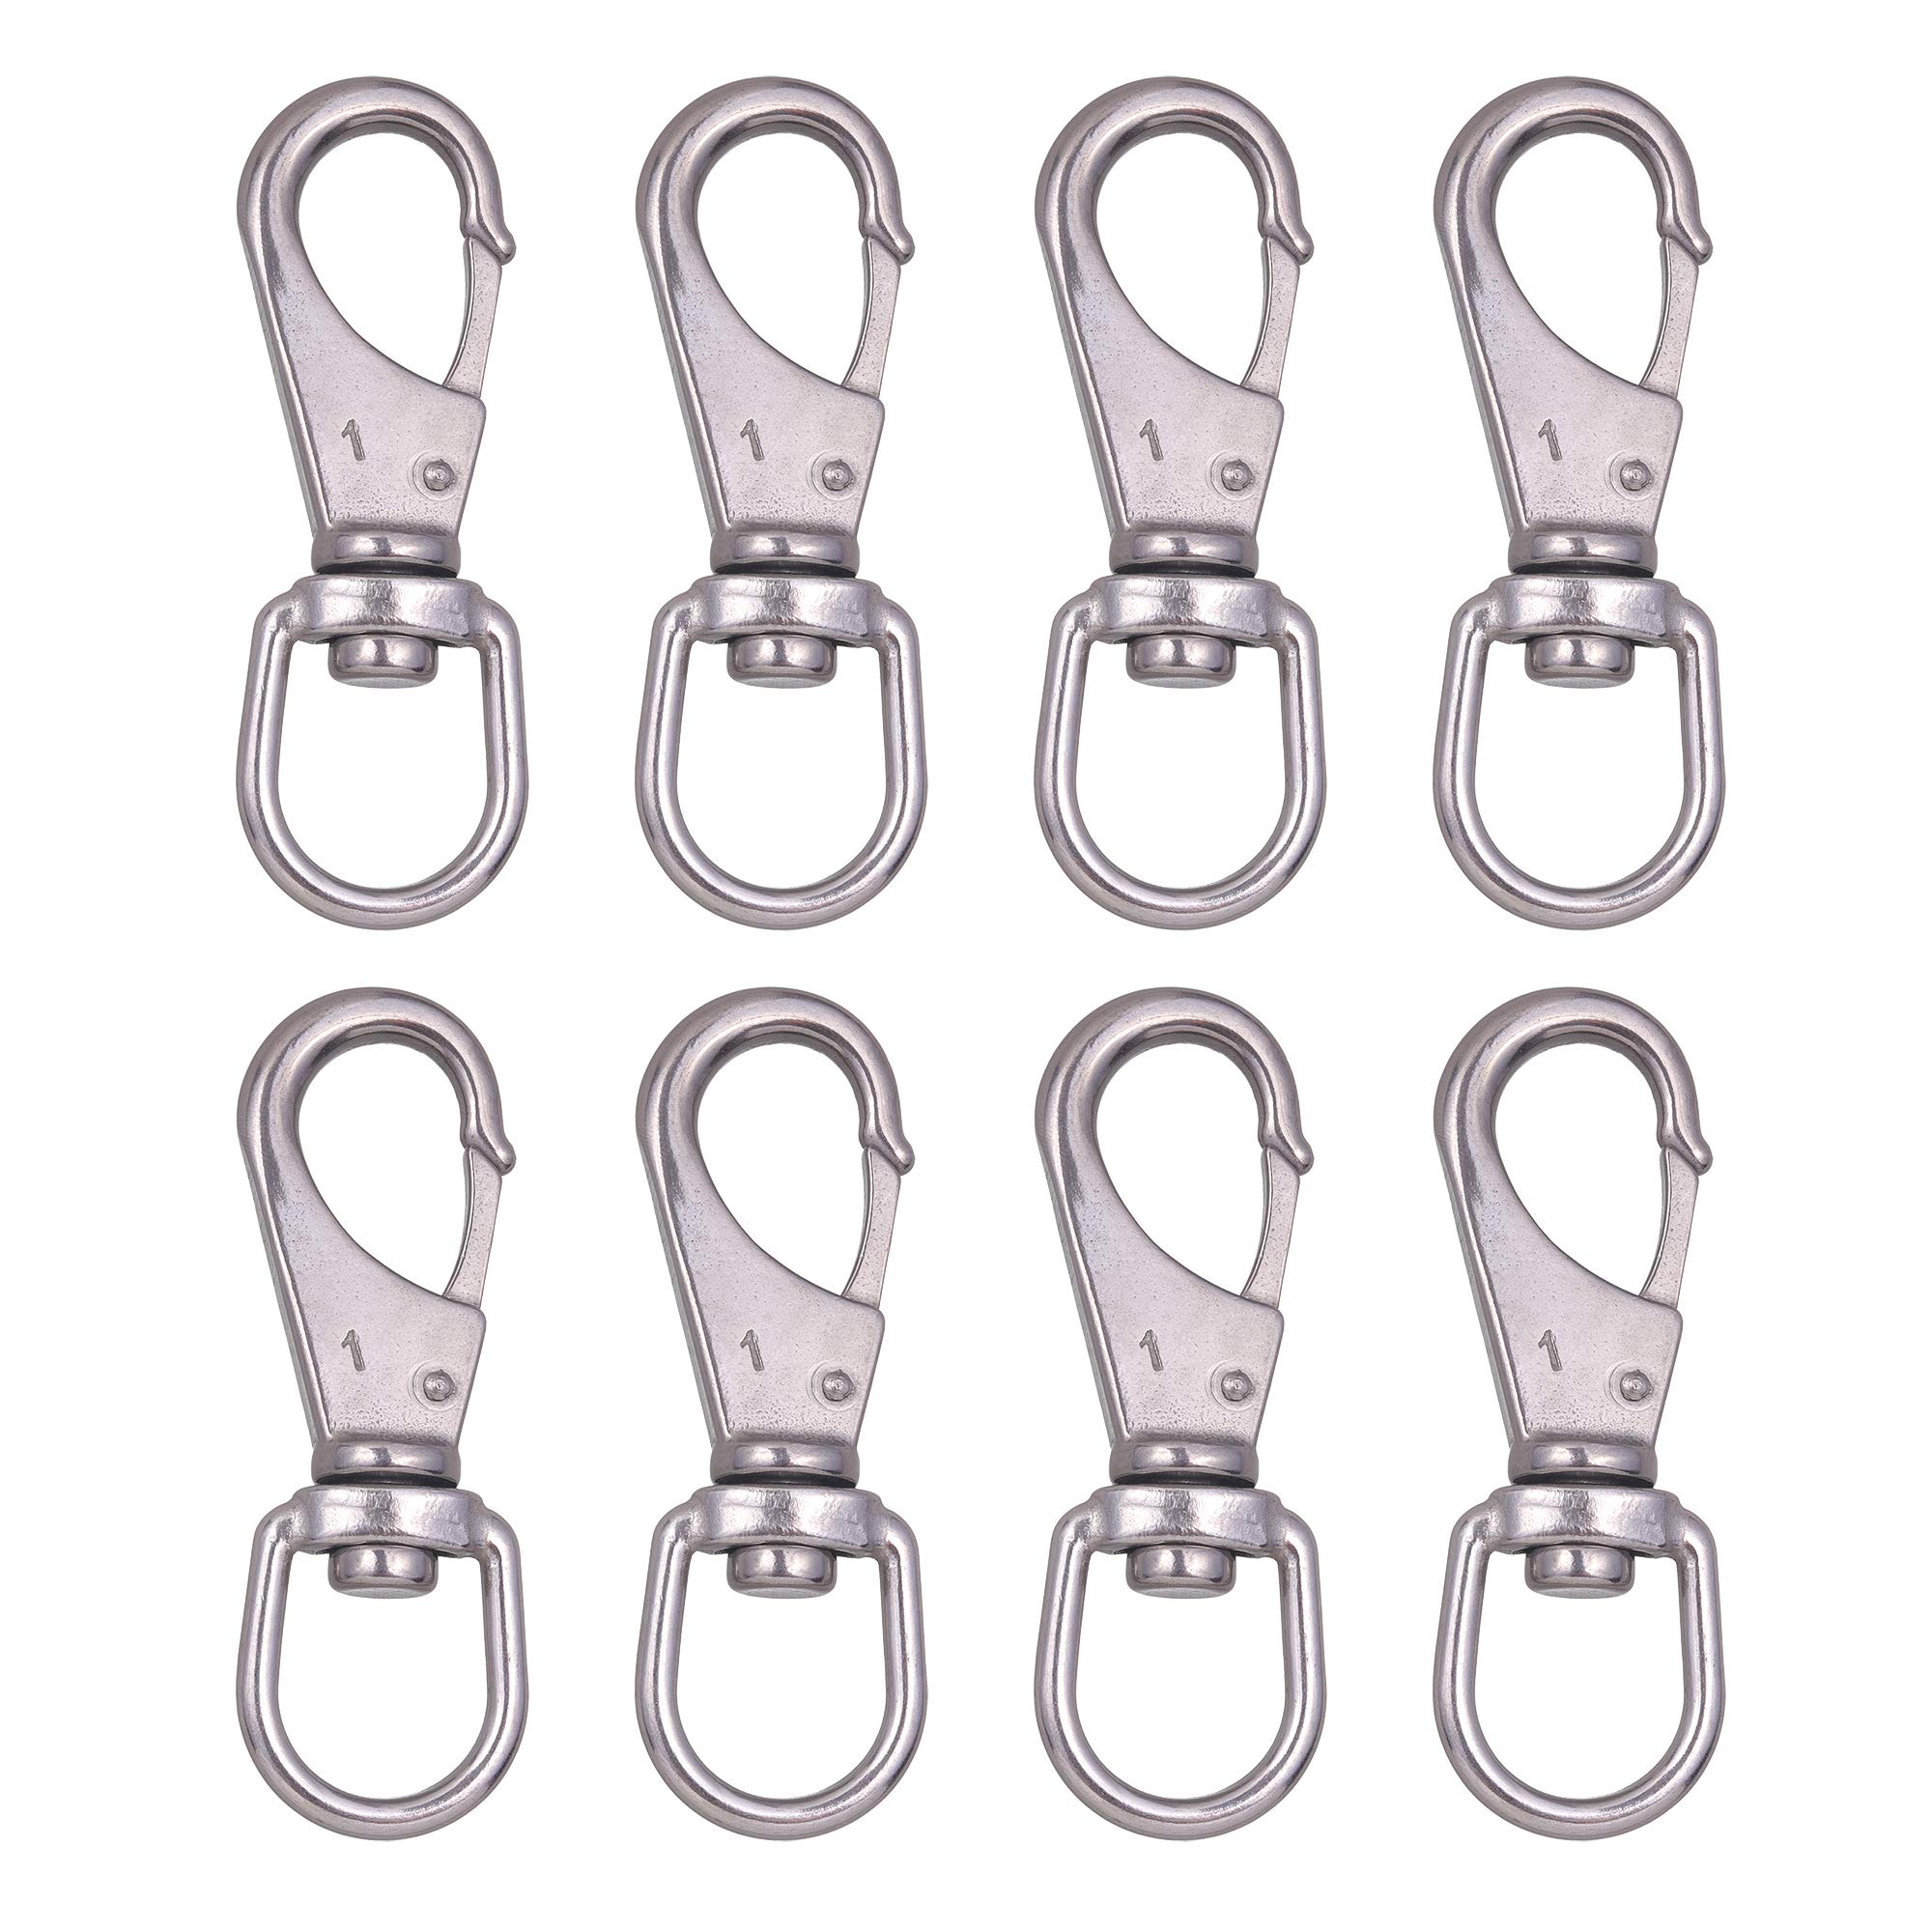 4Pack Swivel Eye Snap Hooks, Heavy Duty Stainless Steel 2.7 Inch 3.5 Inch  Spring Hooks for Keychains, Bird Feeders, Pet Chains, Dog leashes, Keychains